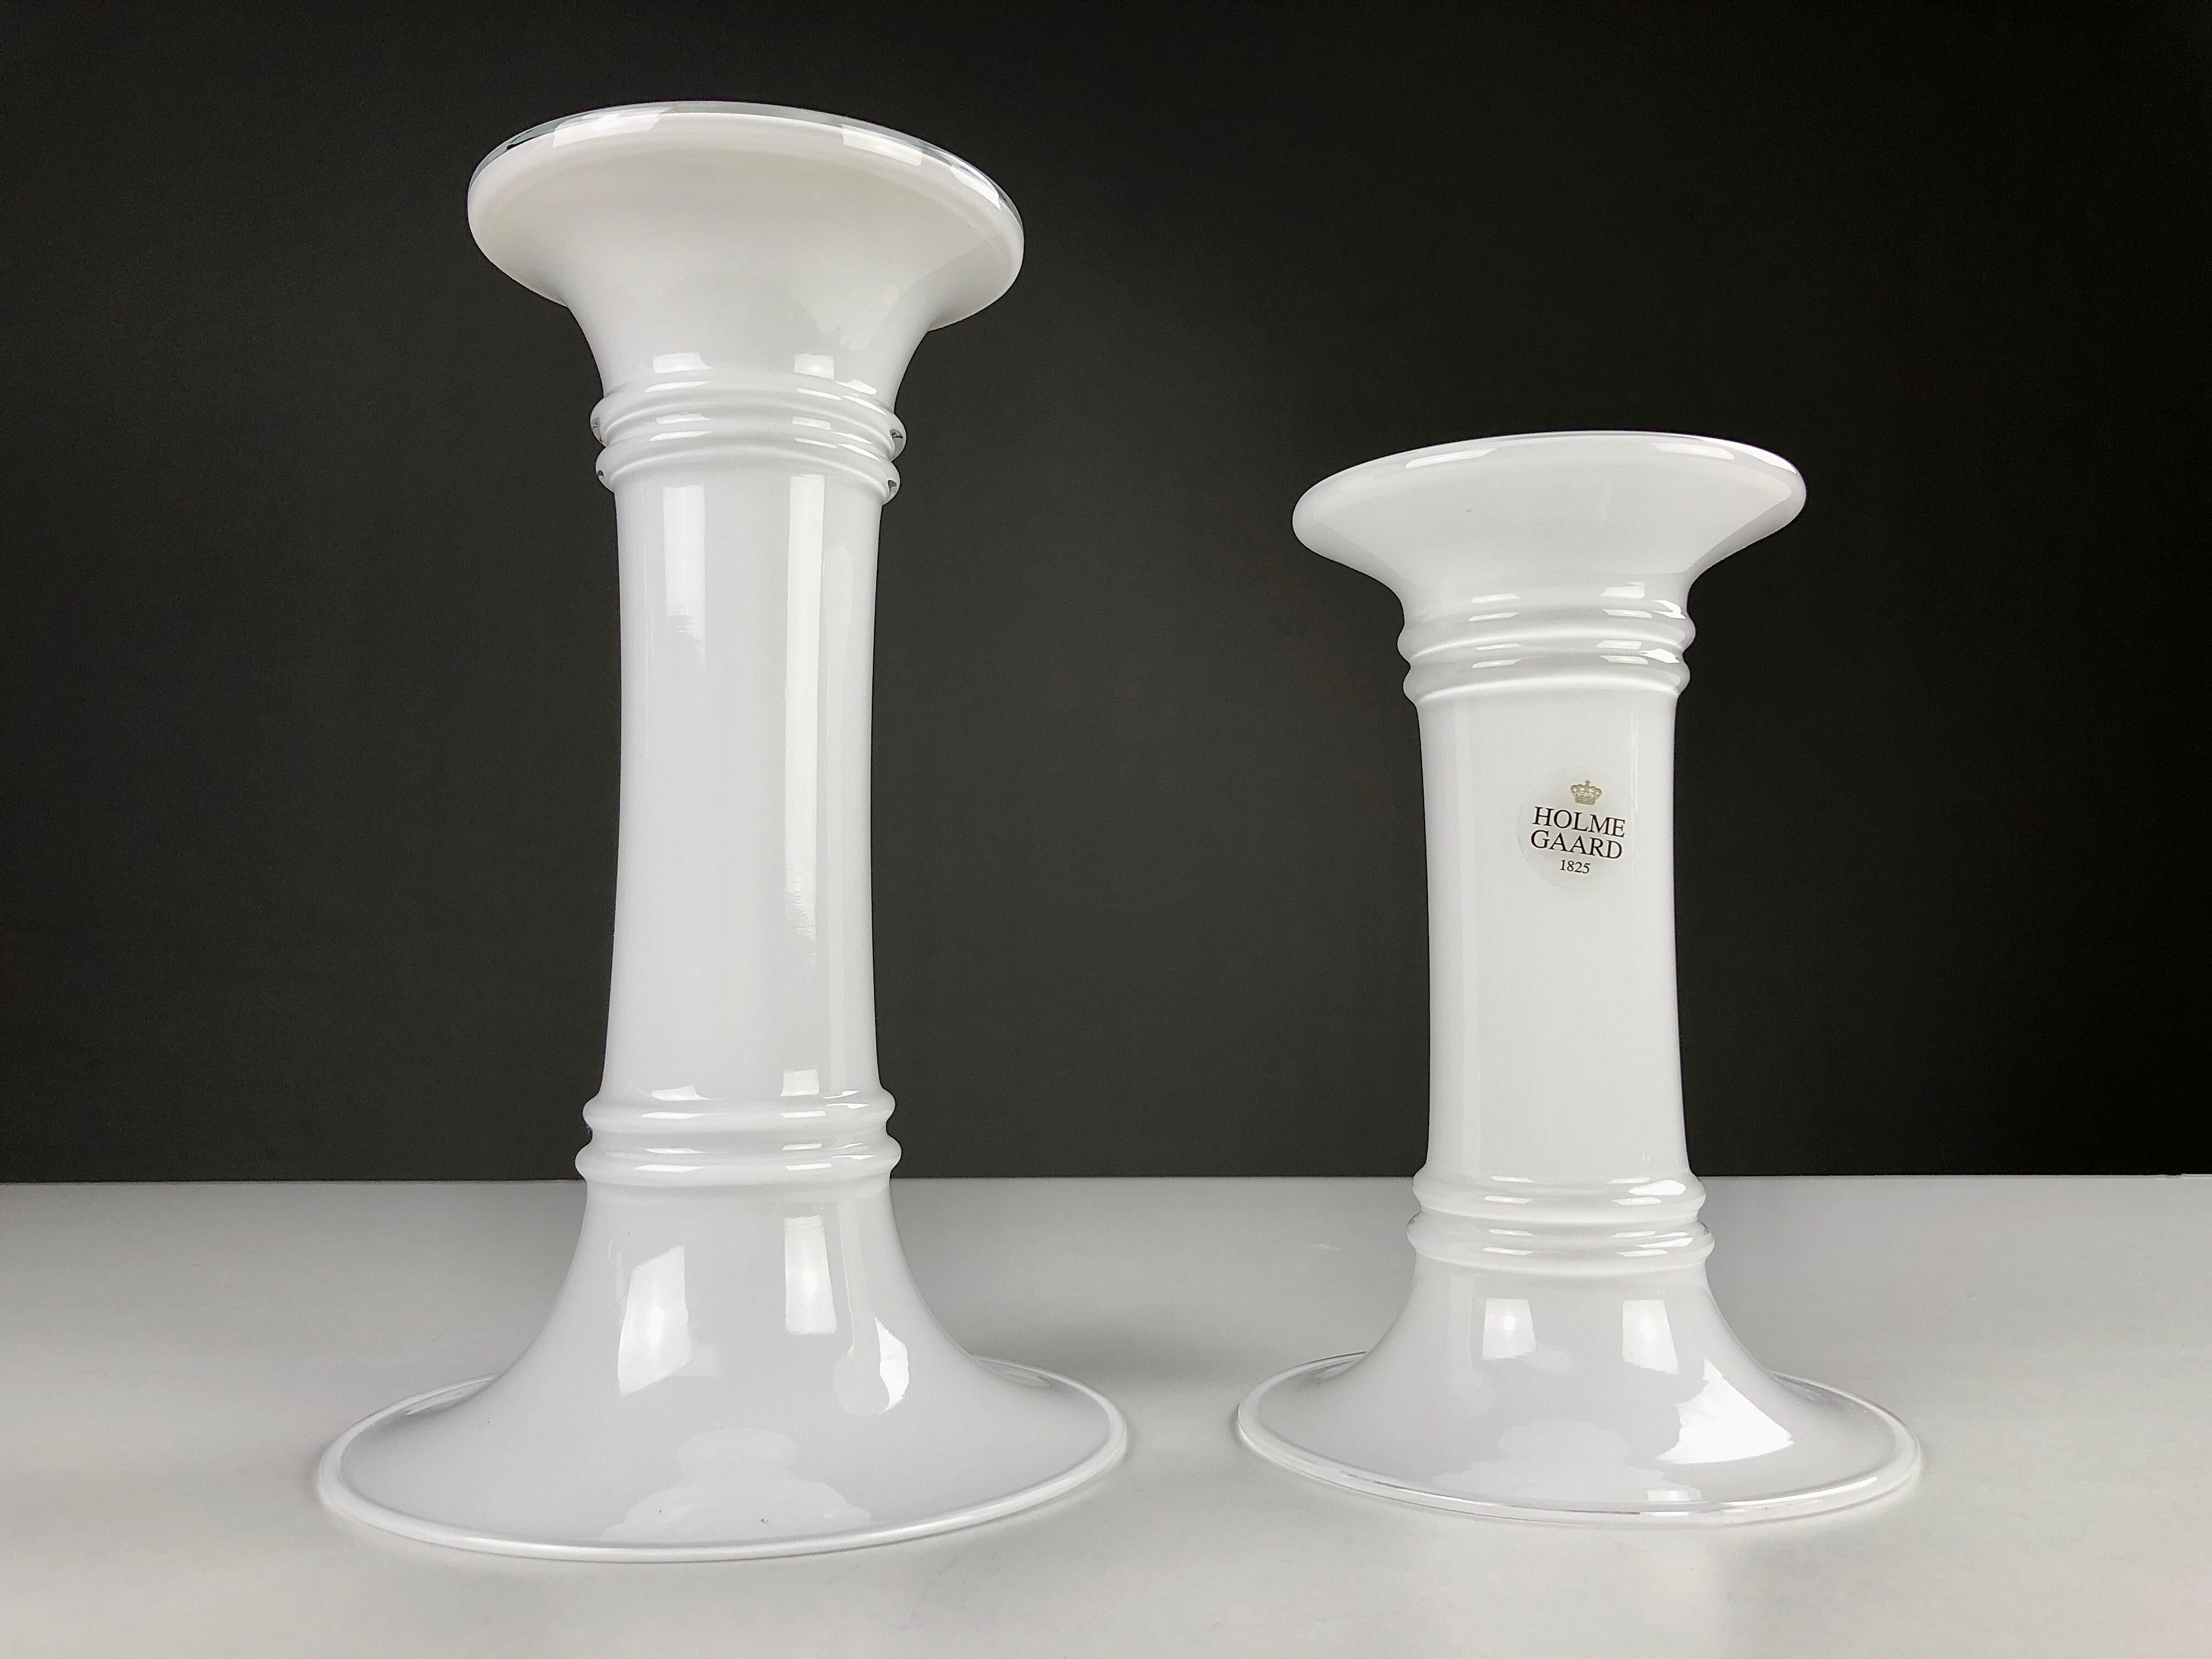 1980s Danish Combined Glass Vases - Candlesticks by Michael Bang for Holmegaard

The two flexible designed Holmegaard vases are designed to be used both as vases and candlesticks depending of which end is up and down when